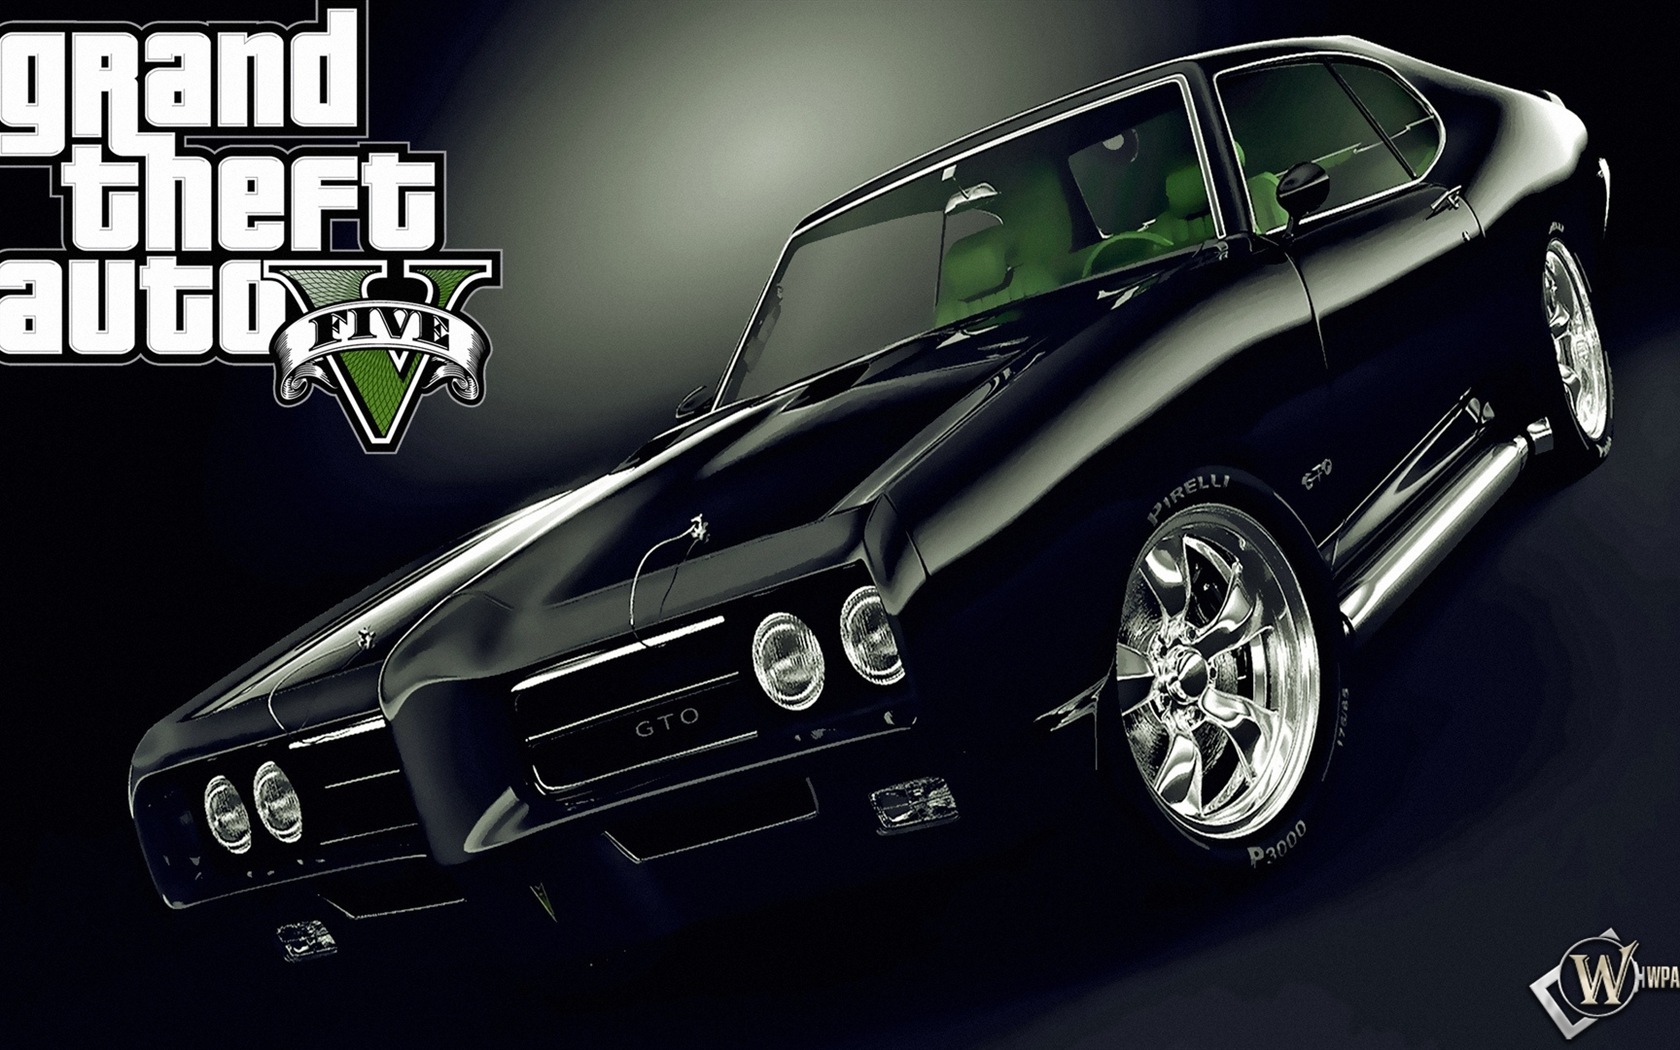 Grand Theft Auto V GTA 5 HD game wallpapers #2 - 1680x1050